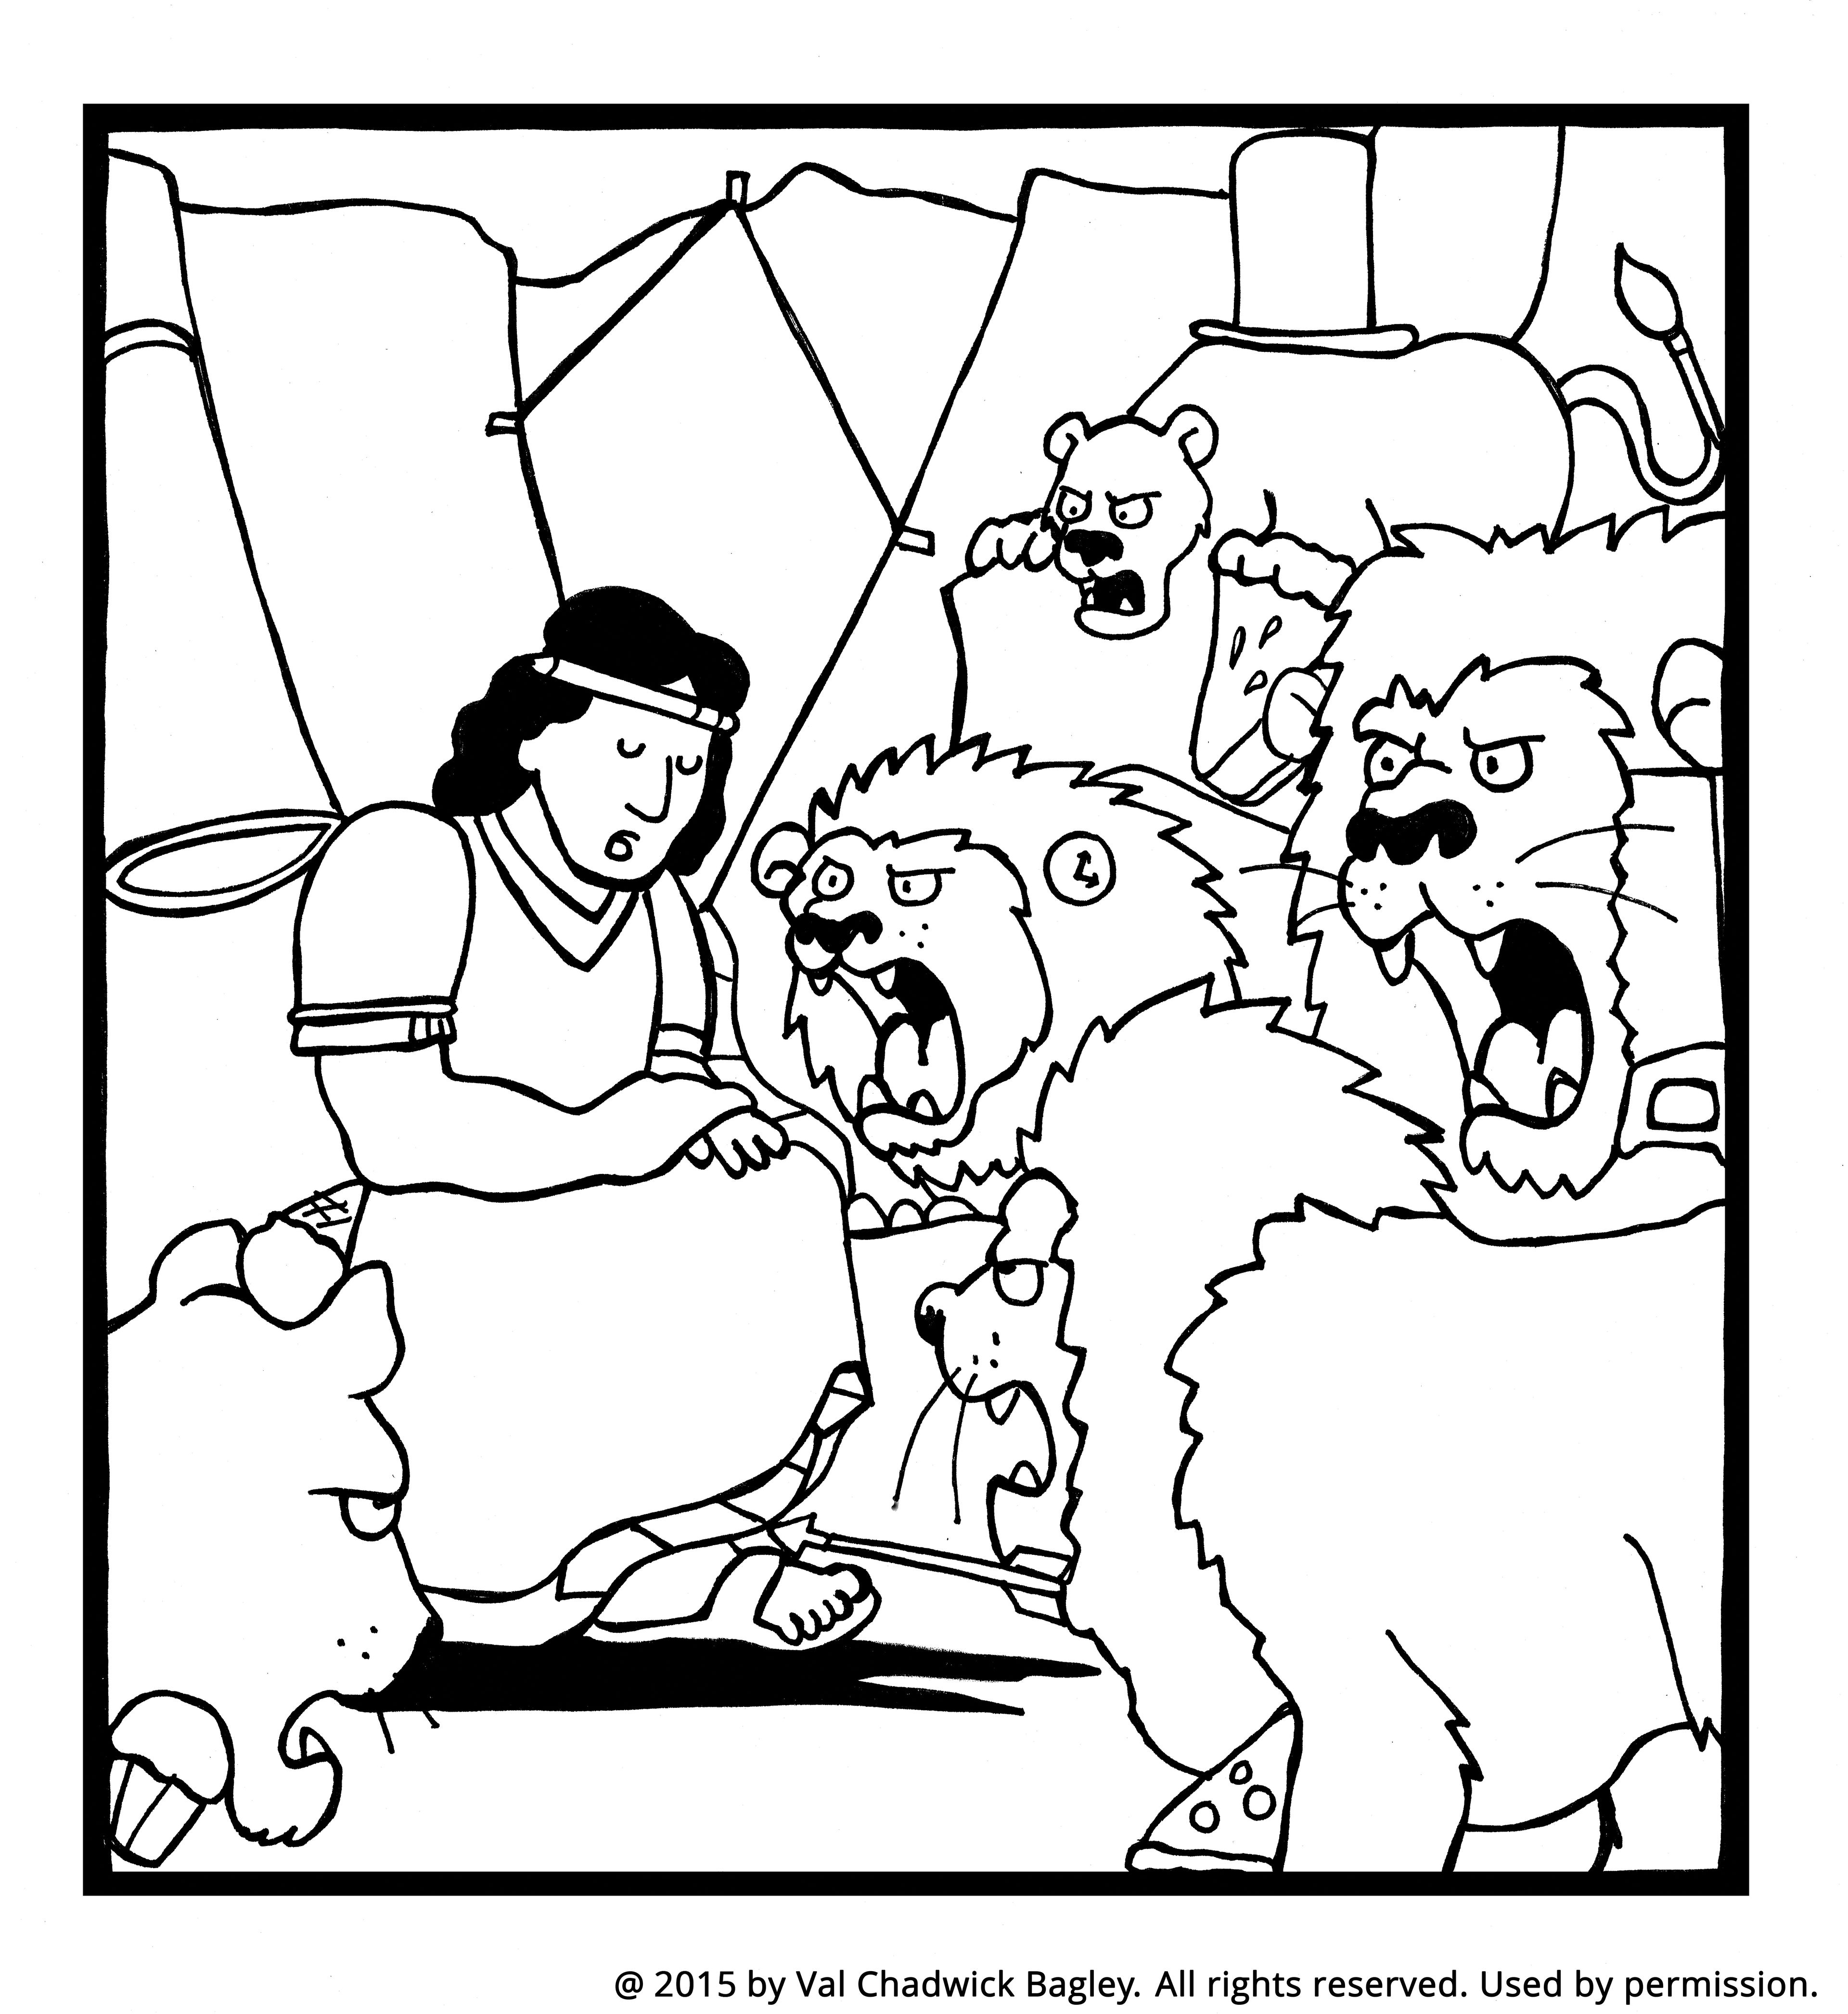 A black-and-white coloring page of Daniel sitting in a den, surrounded by lions.